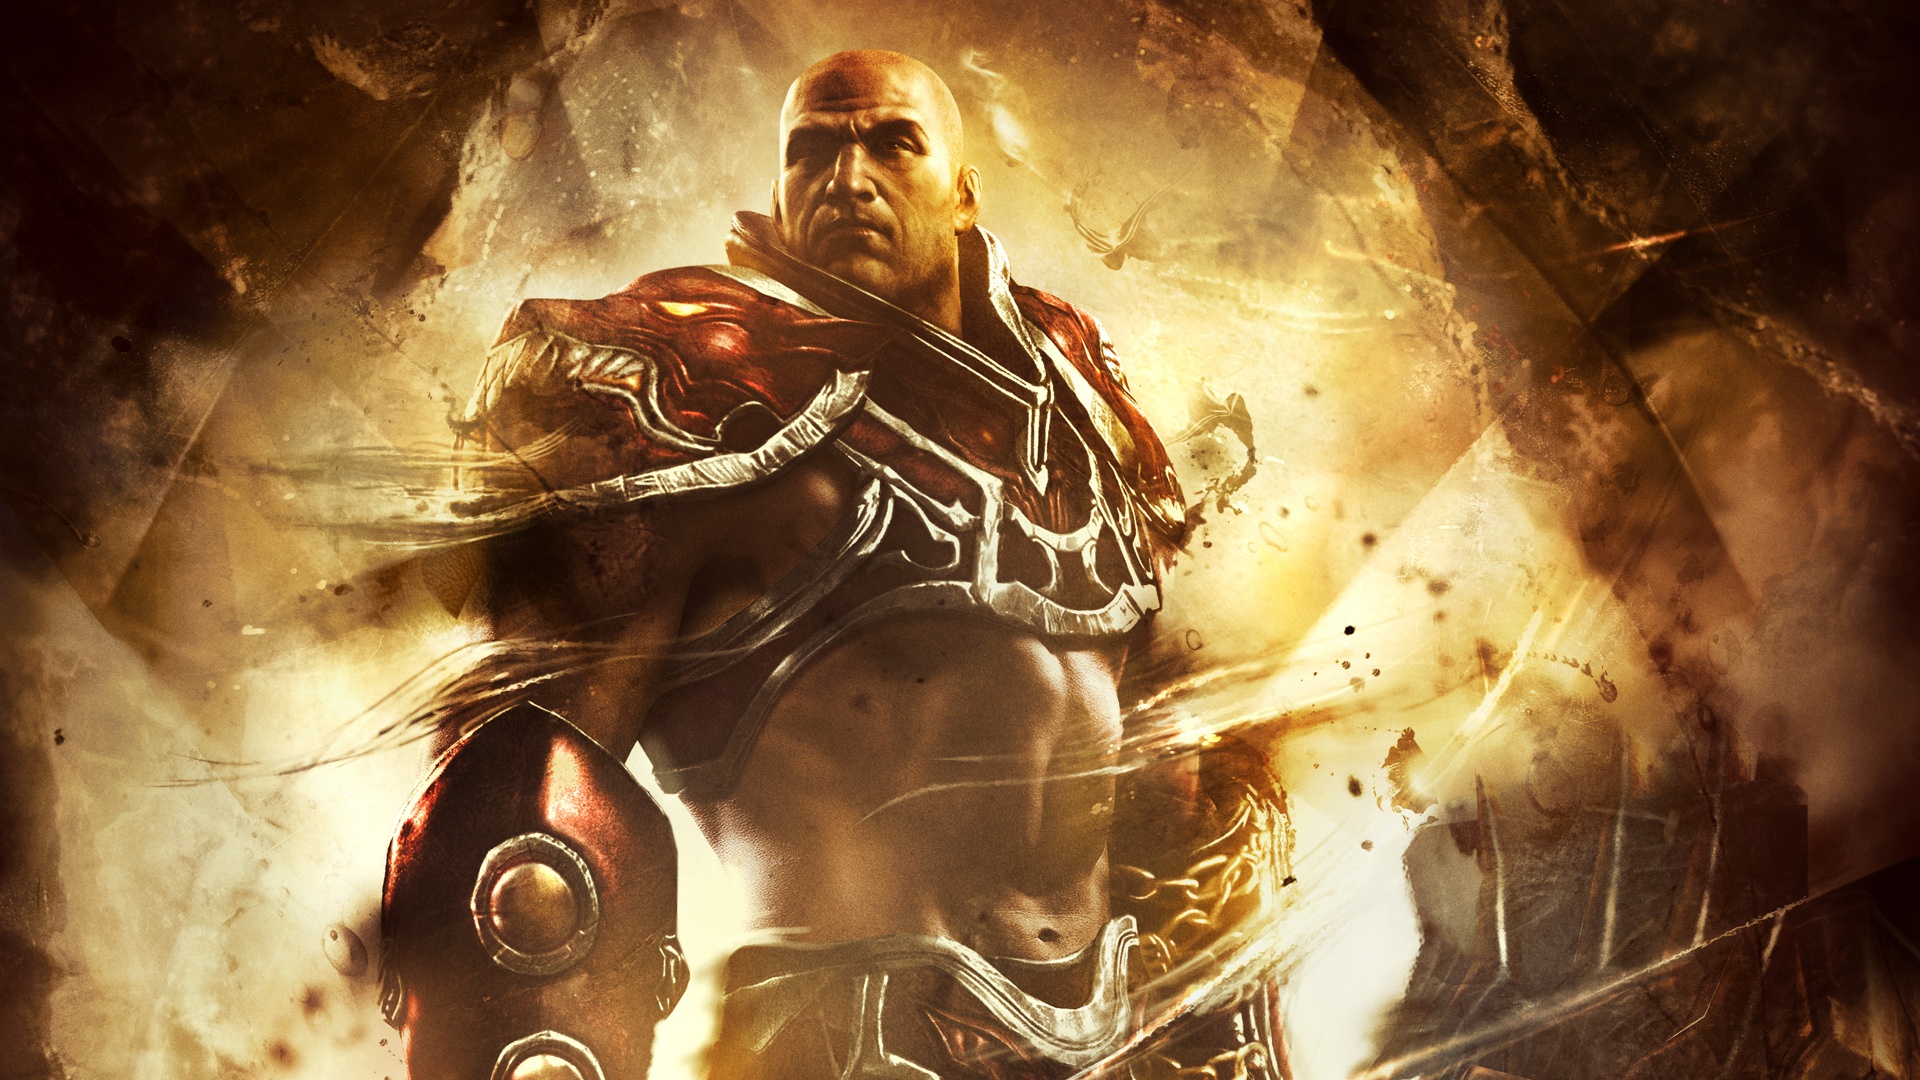 Spartan Warrior God of War Ascension Wallpapers HD Wallpapers 1920x1080